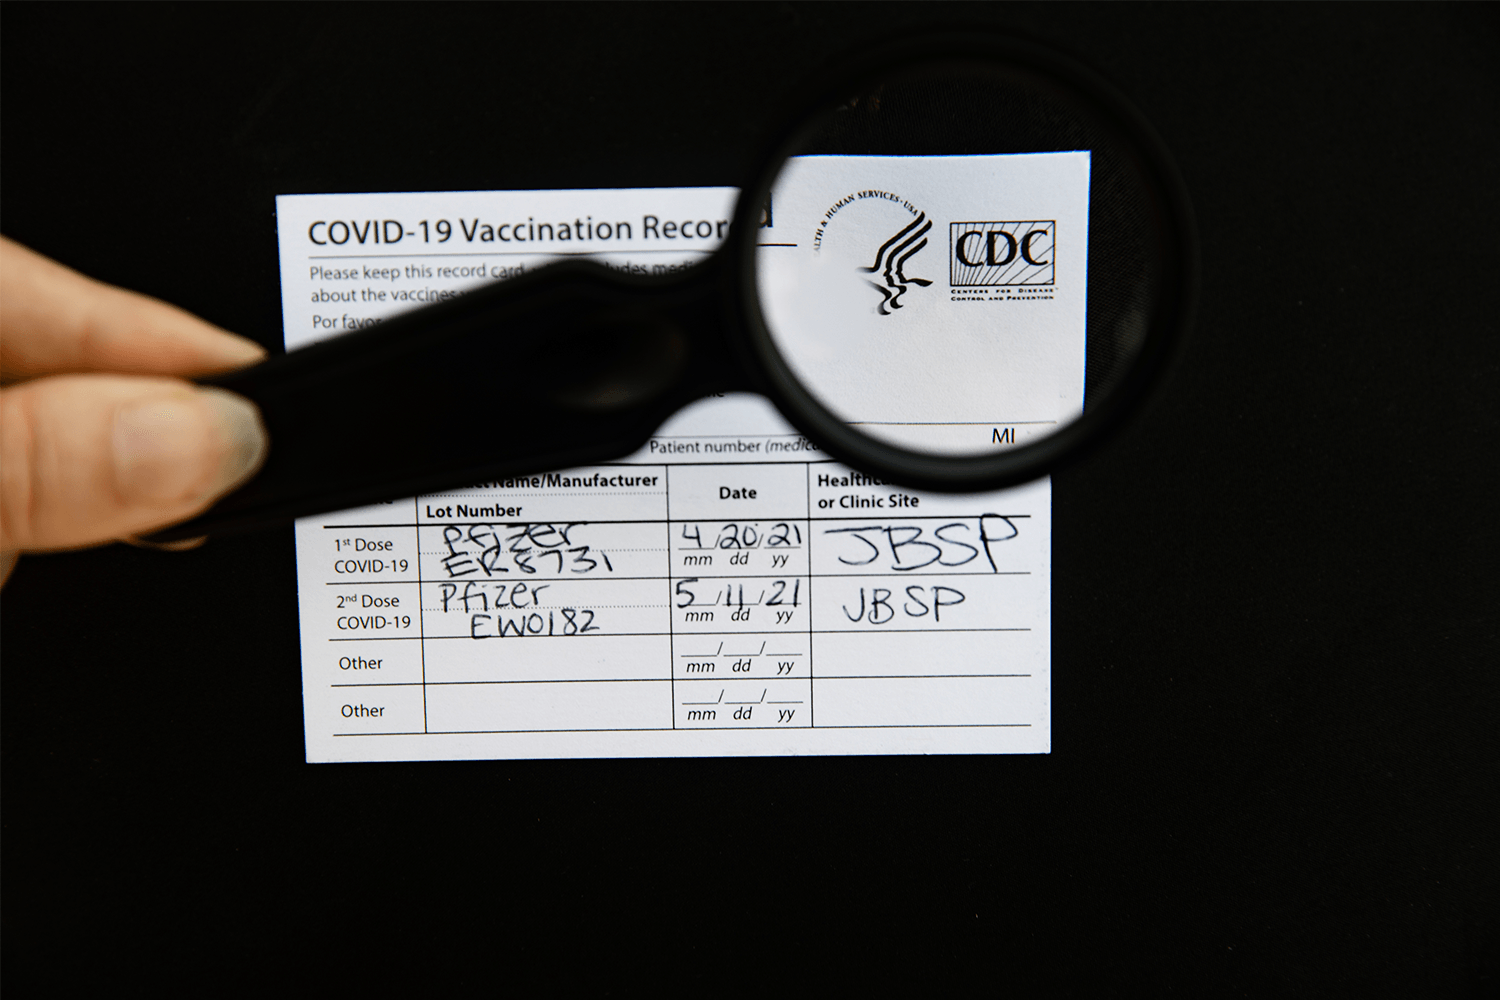 An authentic COVID-19 vaccine certificate